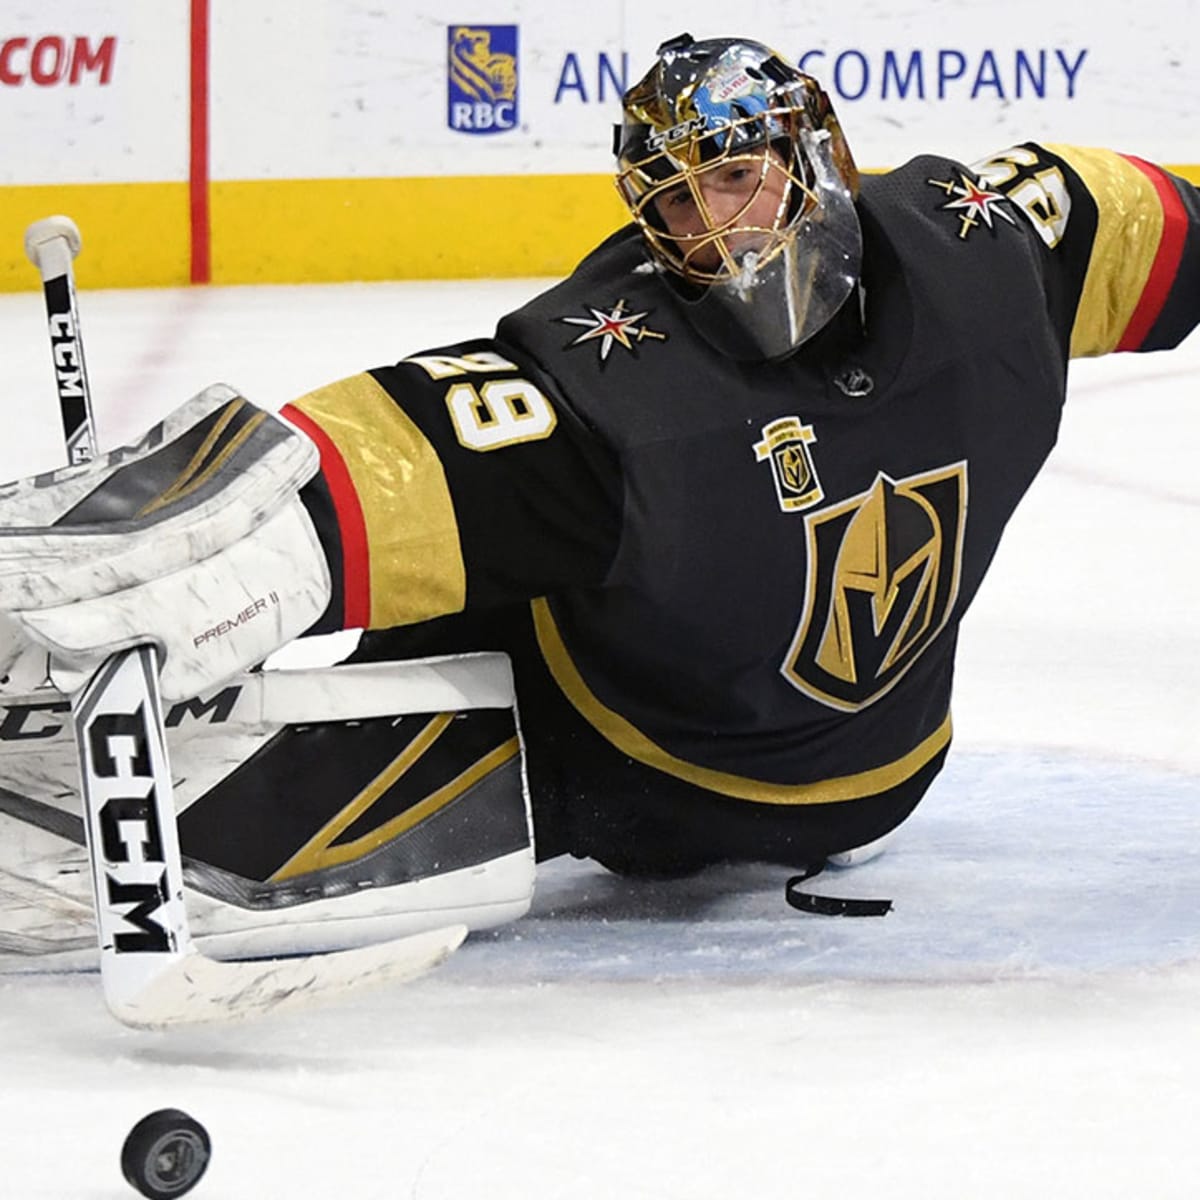 Marc-Andre Fleury wants Penguins' starting job back, but can he